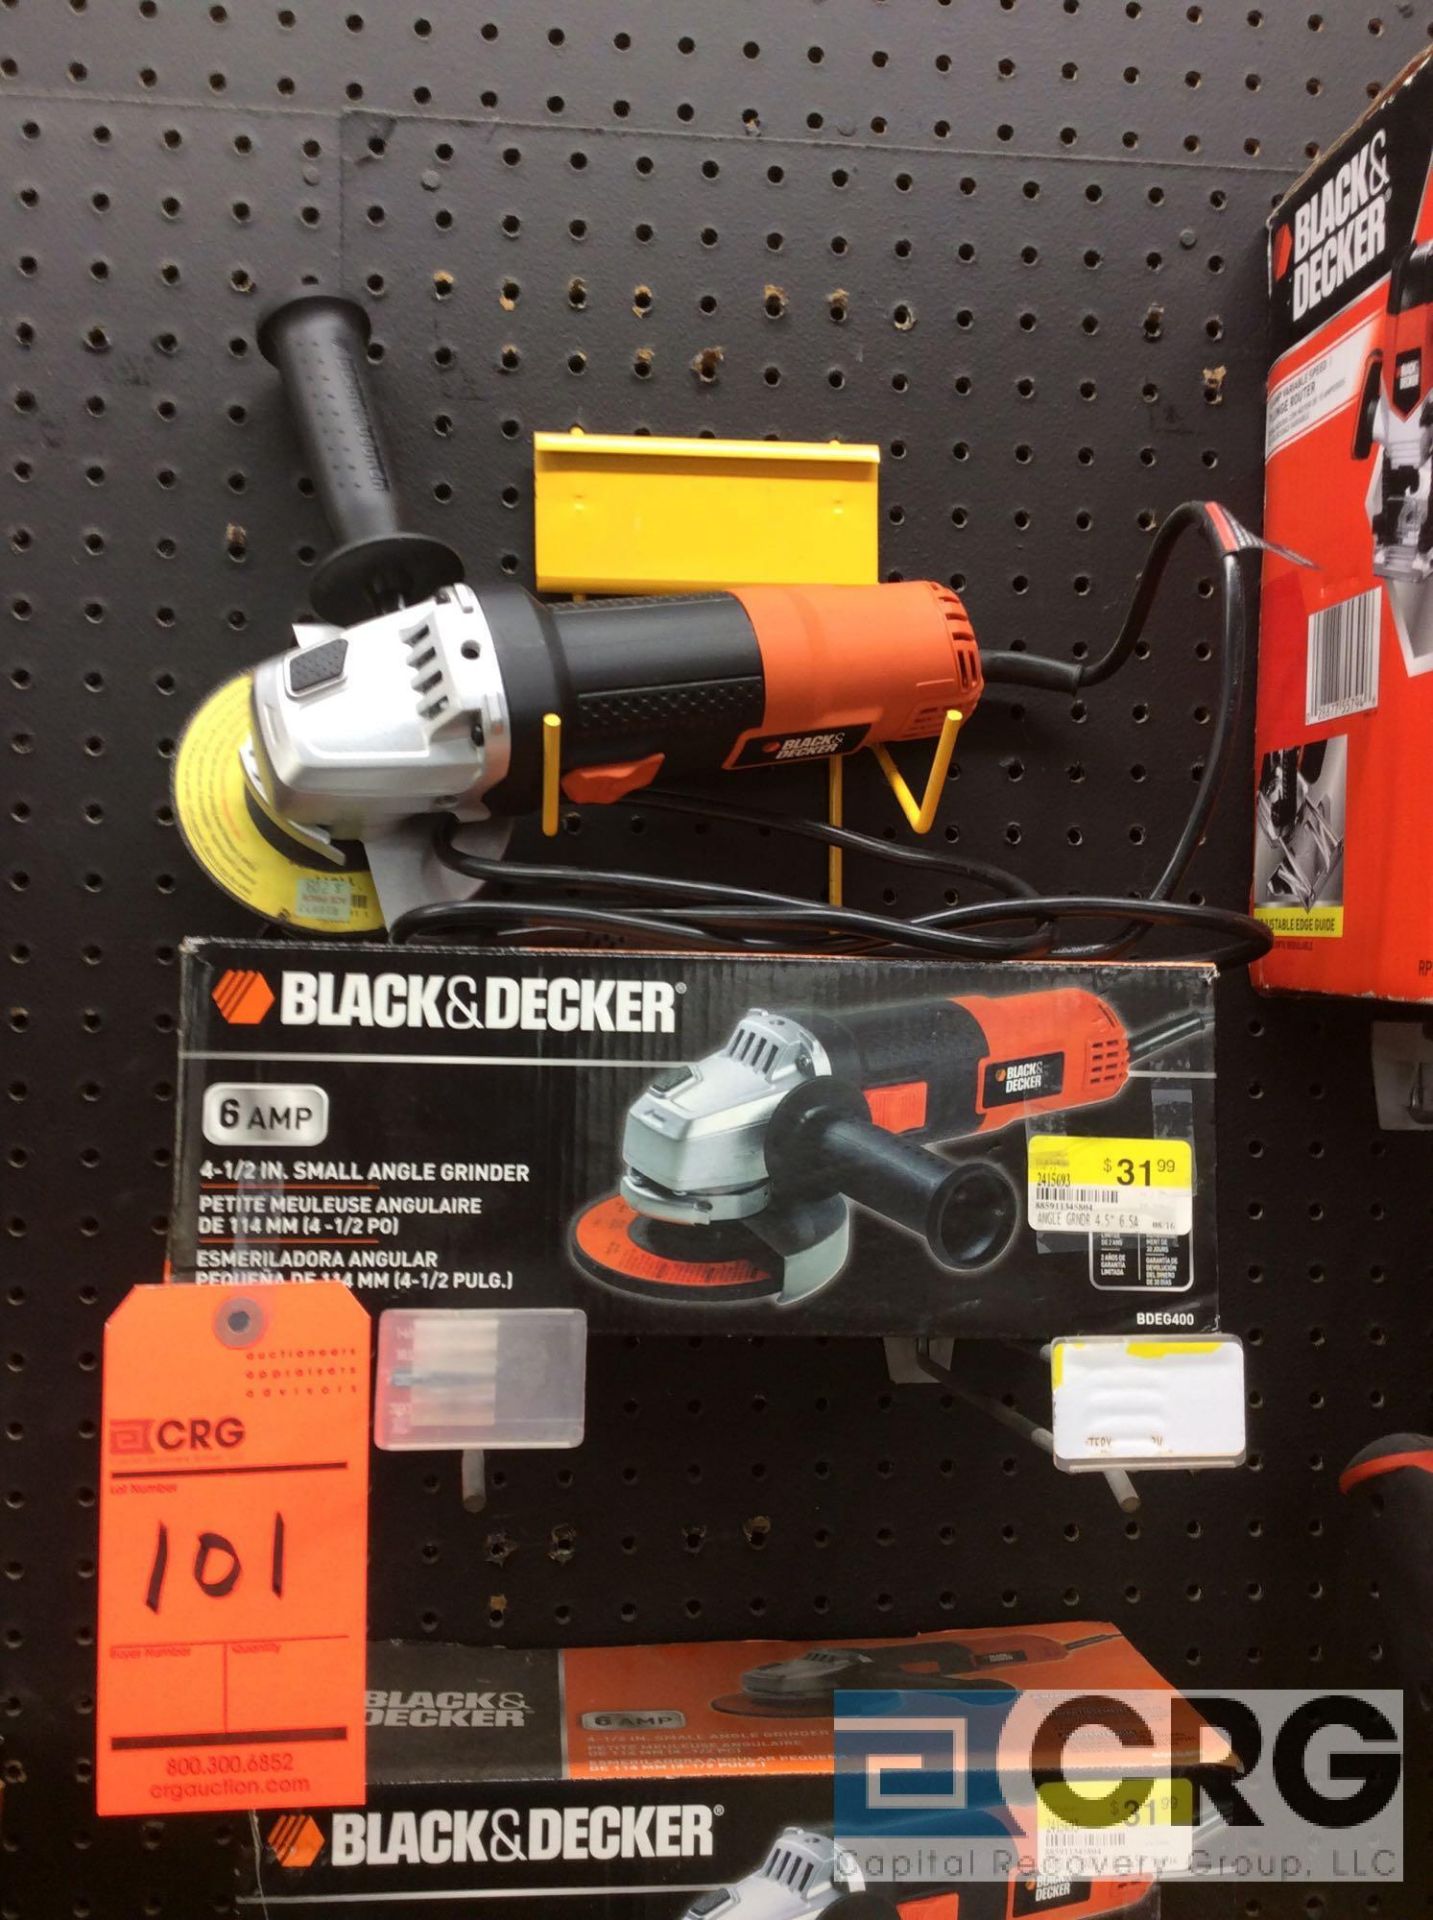 Black and Decker 4 1/2 in. right angle grinder (NEW)